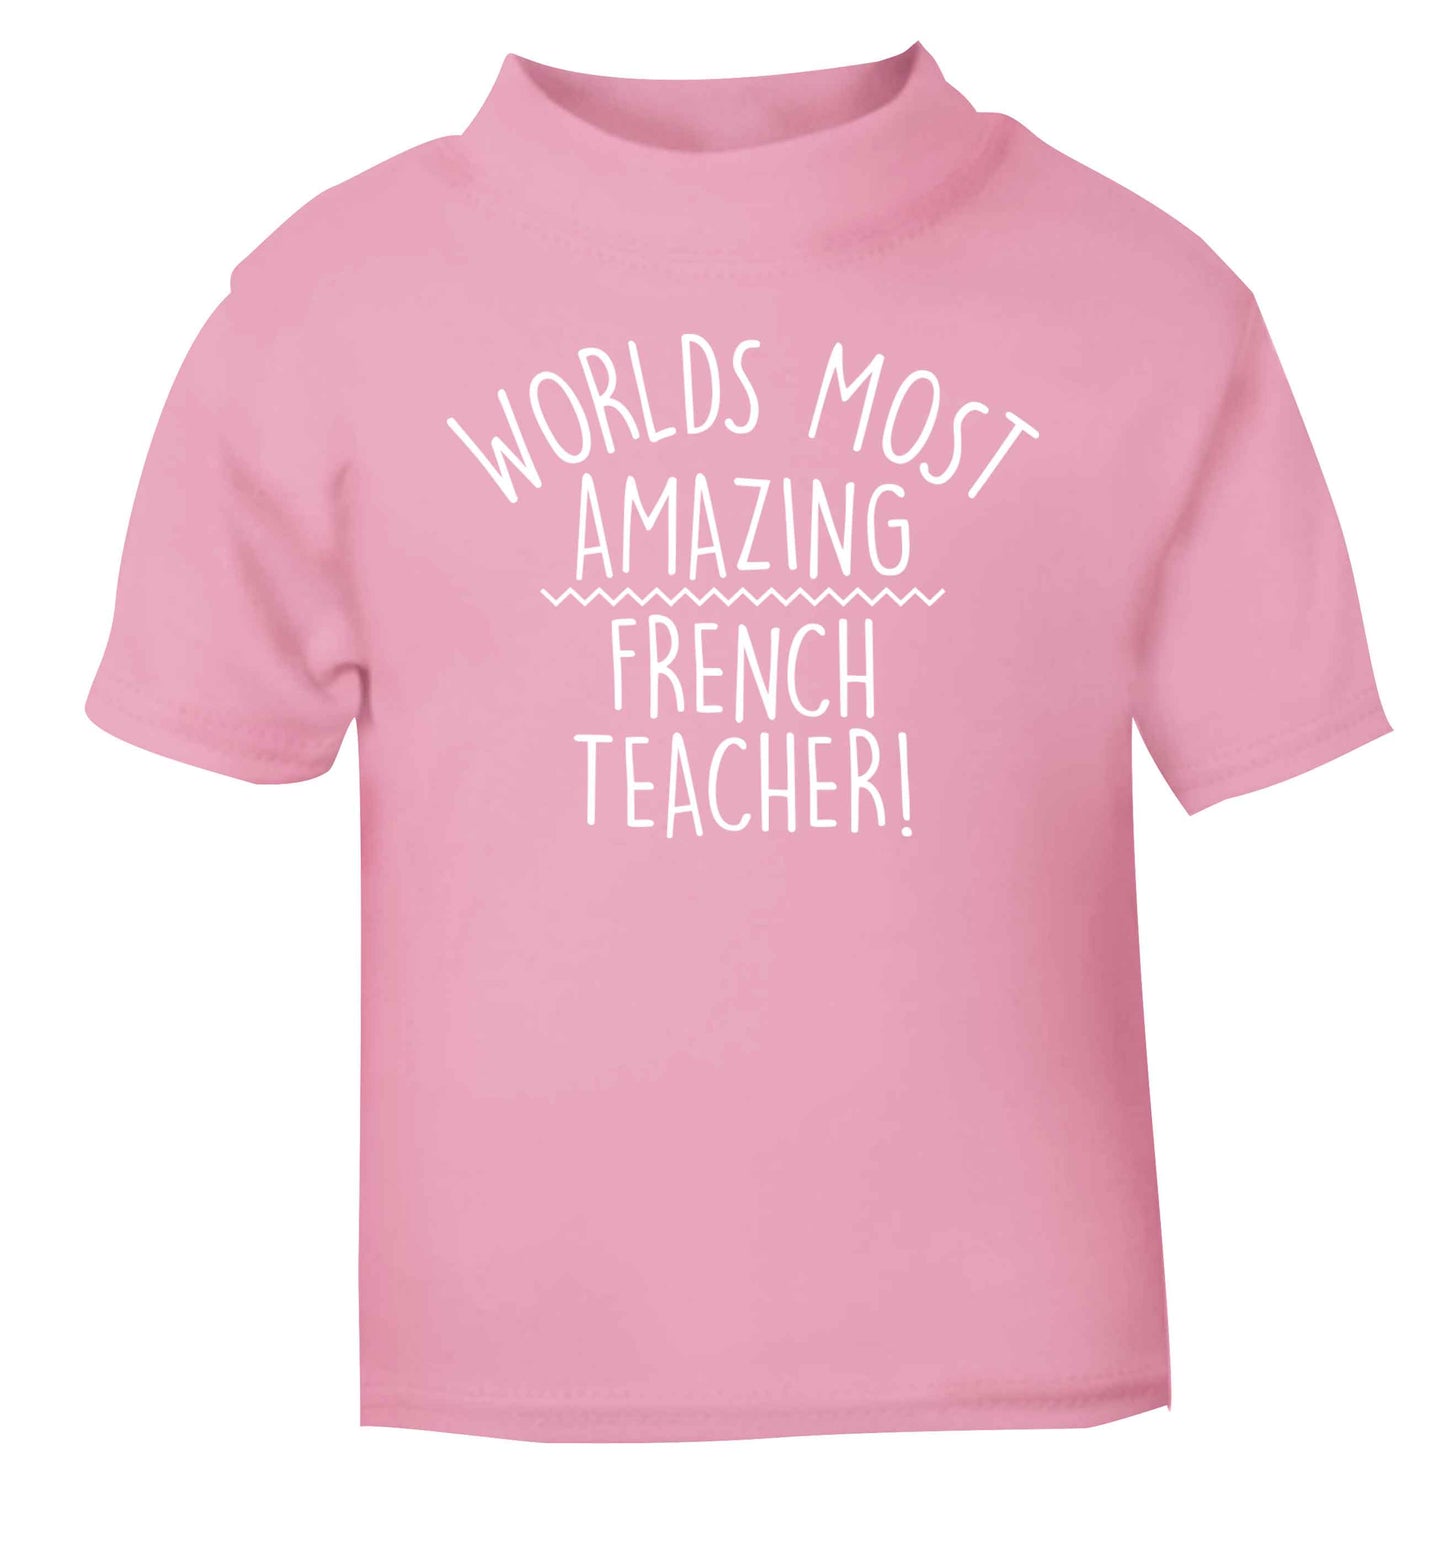 Worlds most amazing French teacher light pink baby toddler Tshirt 2 Years